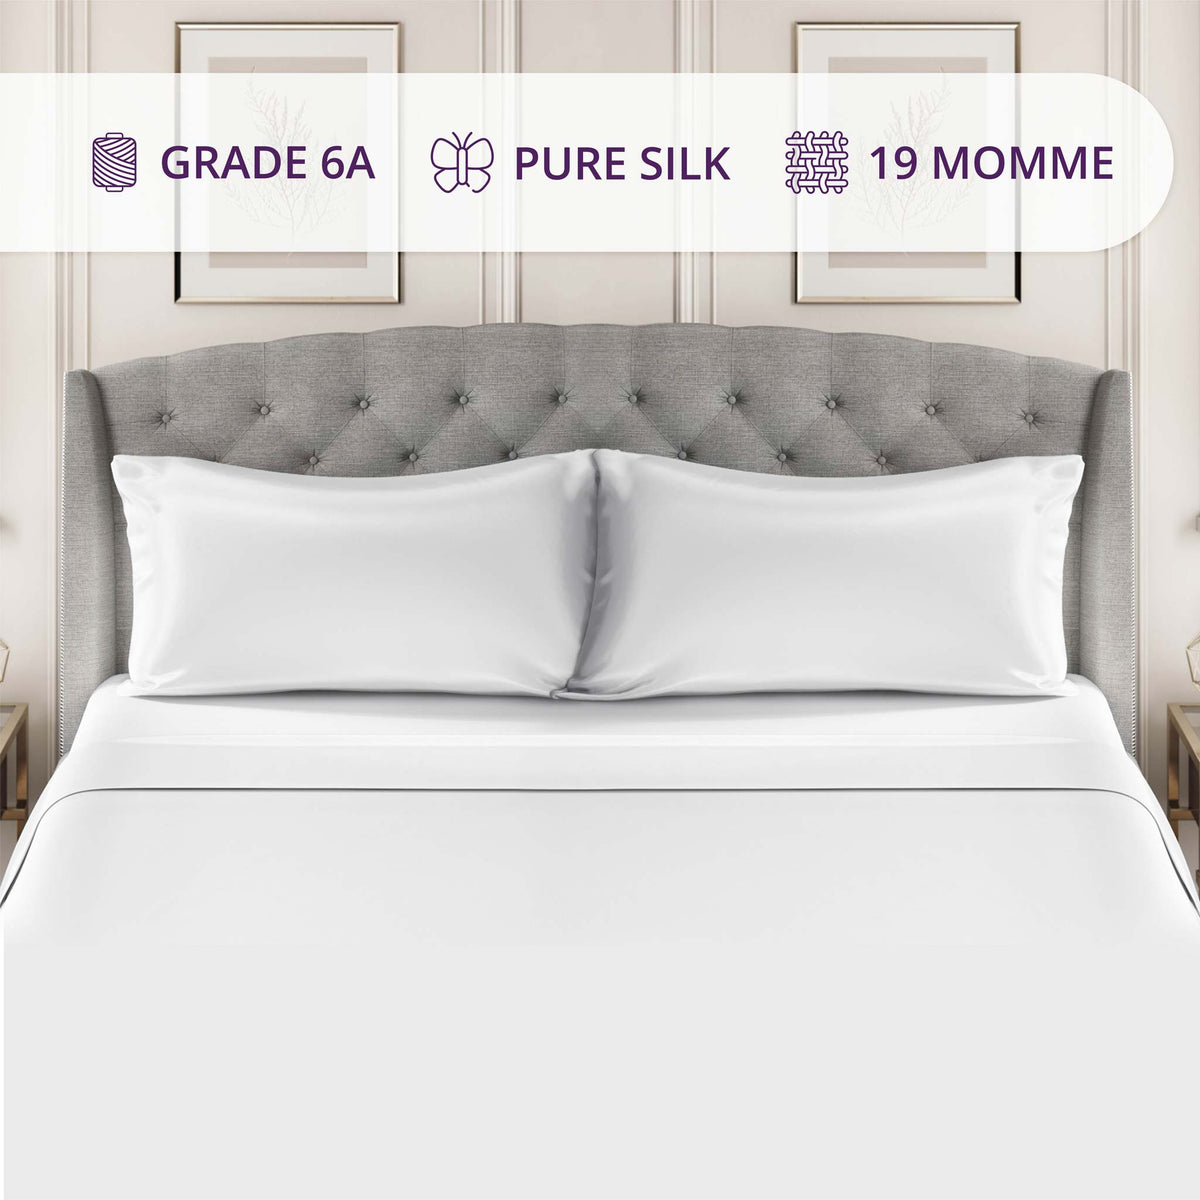 Silk Sheet Set Features 19 Momme White